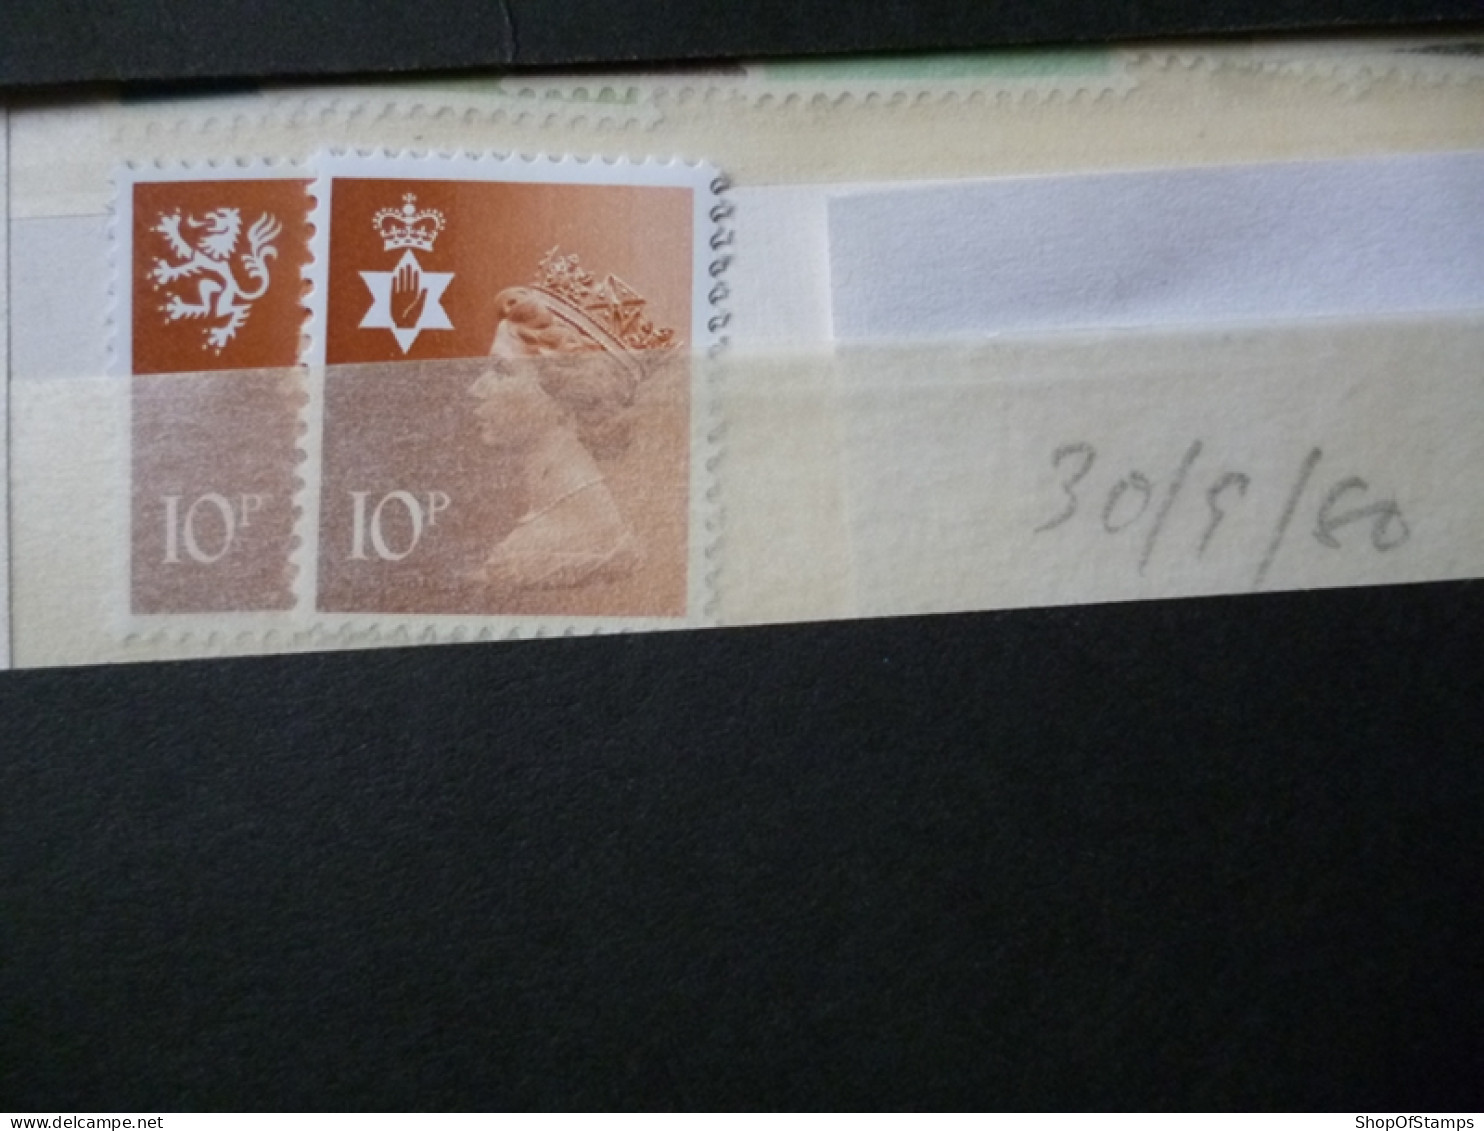 GREAT BRITAIN SG X 1980 30.9.80  MINT DEFI ISSUE FROM GPO IN ENVELOPE - Maschinenstempel (EMA)